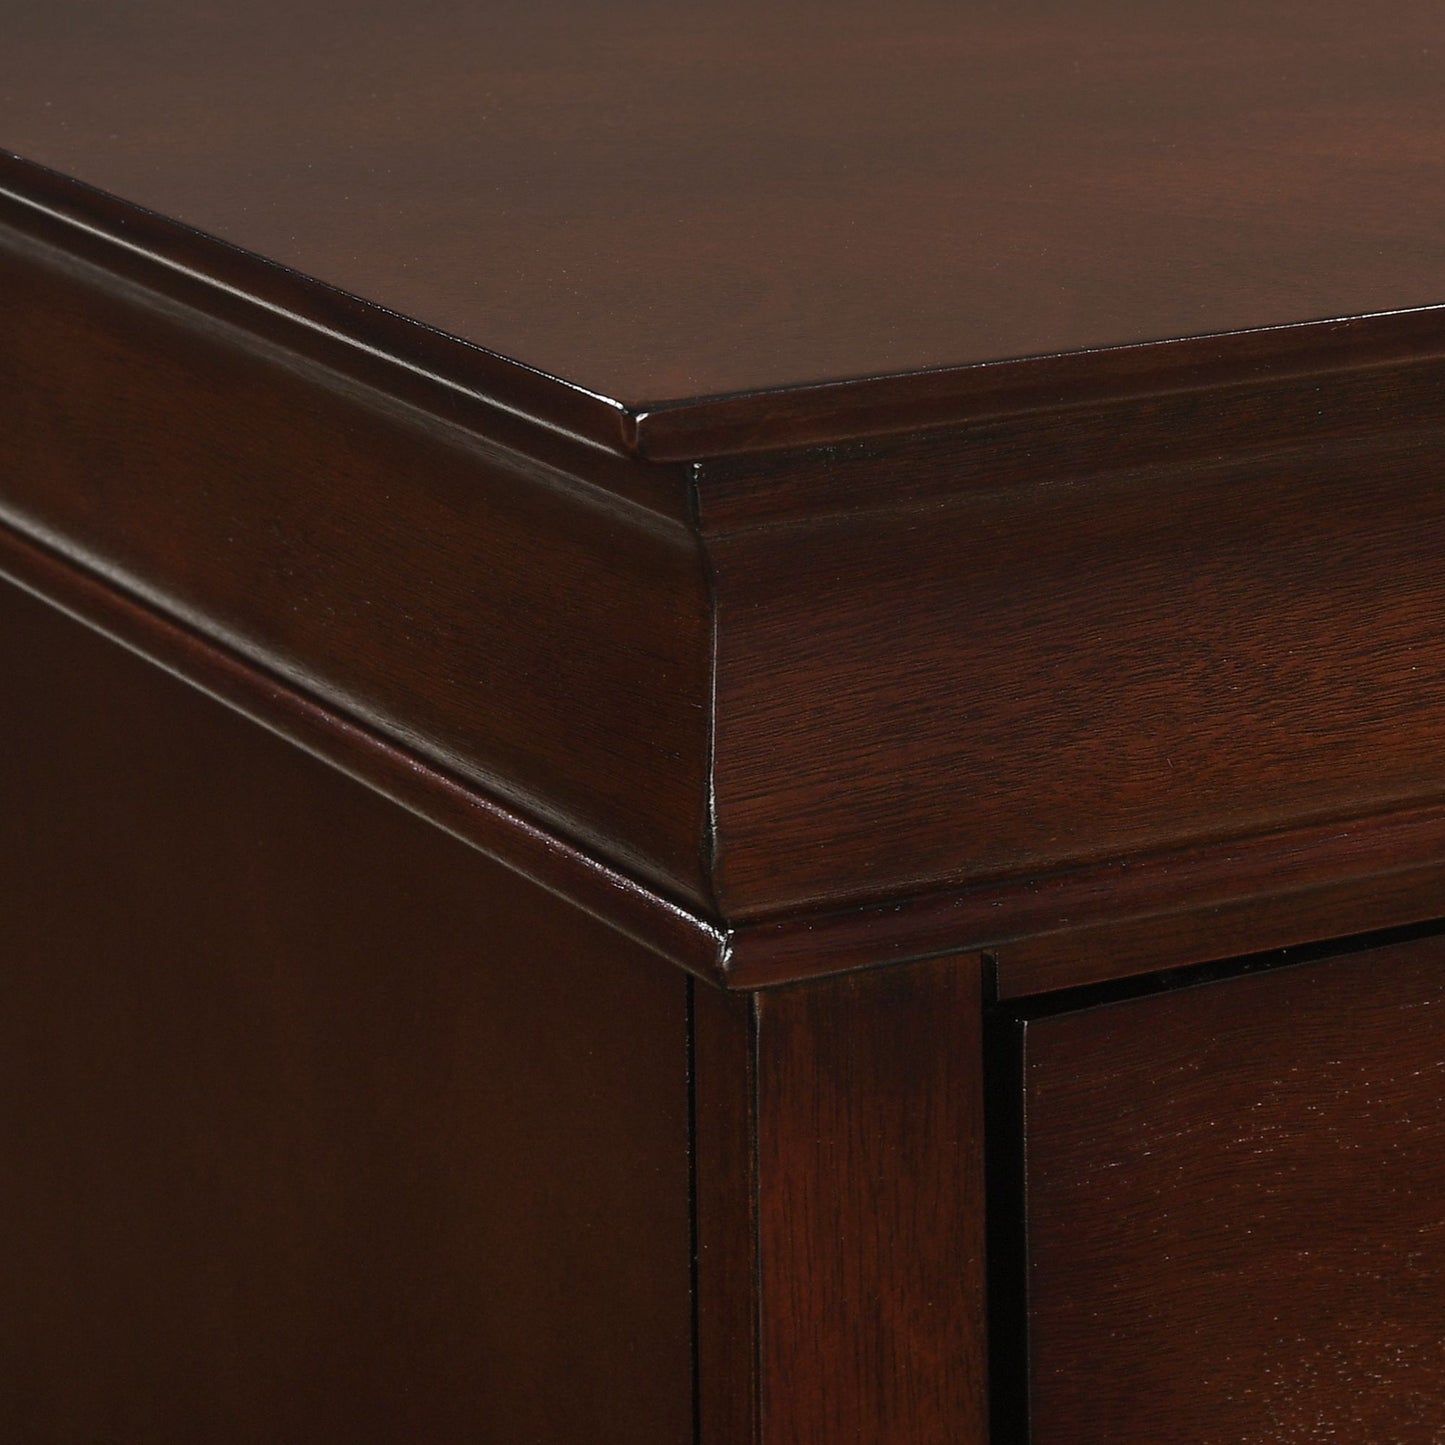 Louis Philippe - 5-Drawer Chest